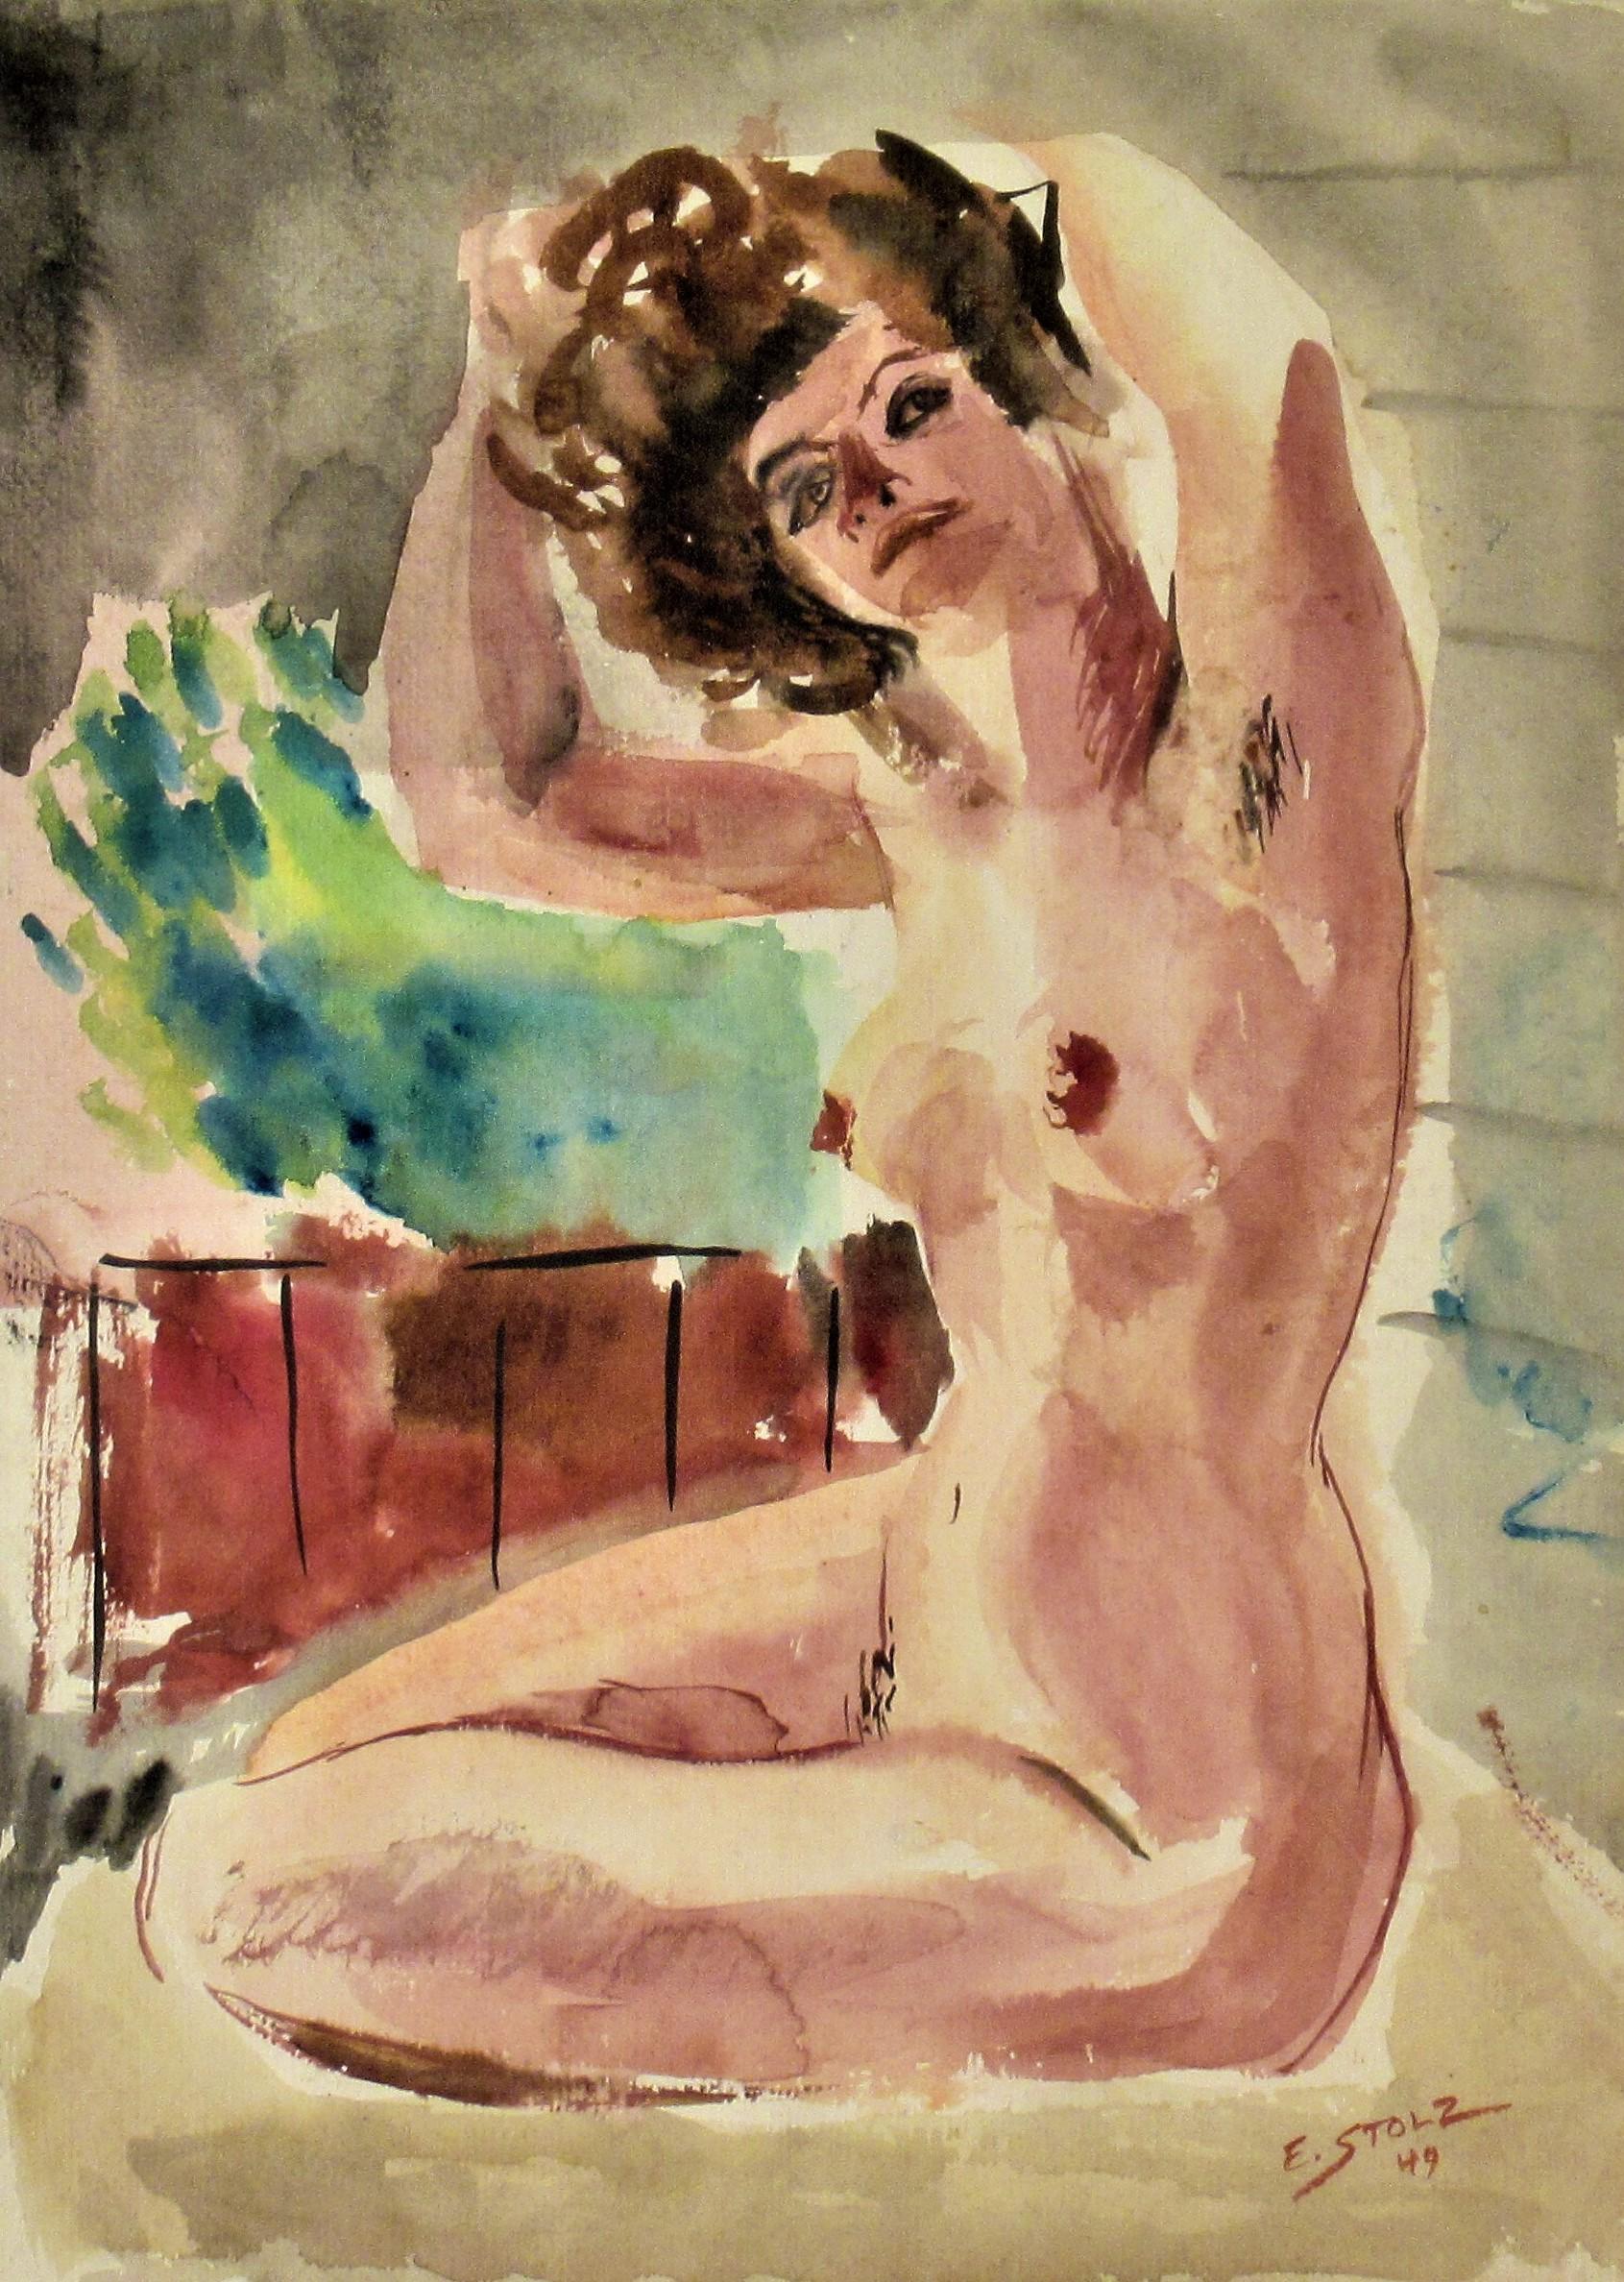 Sitting Nude - American Impressionist Art by Hernst Stolz